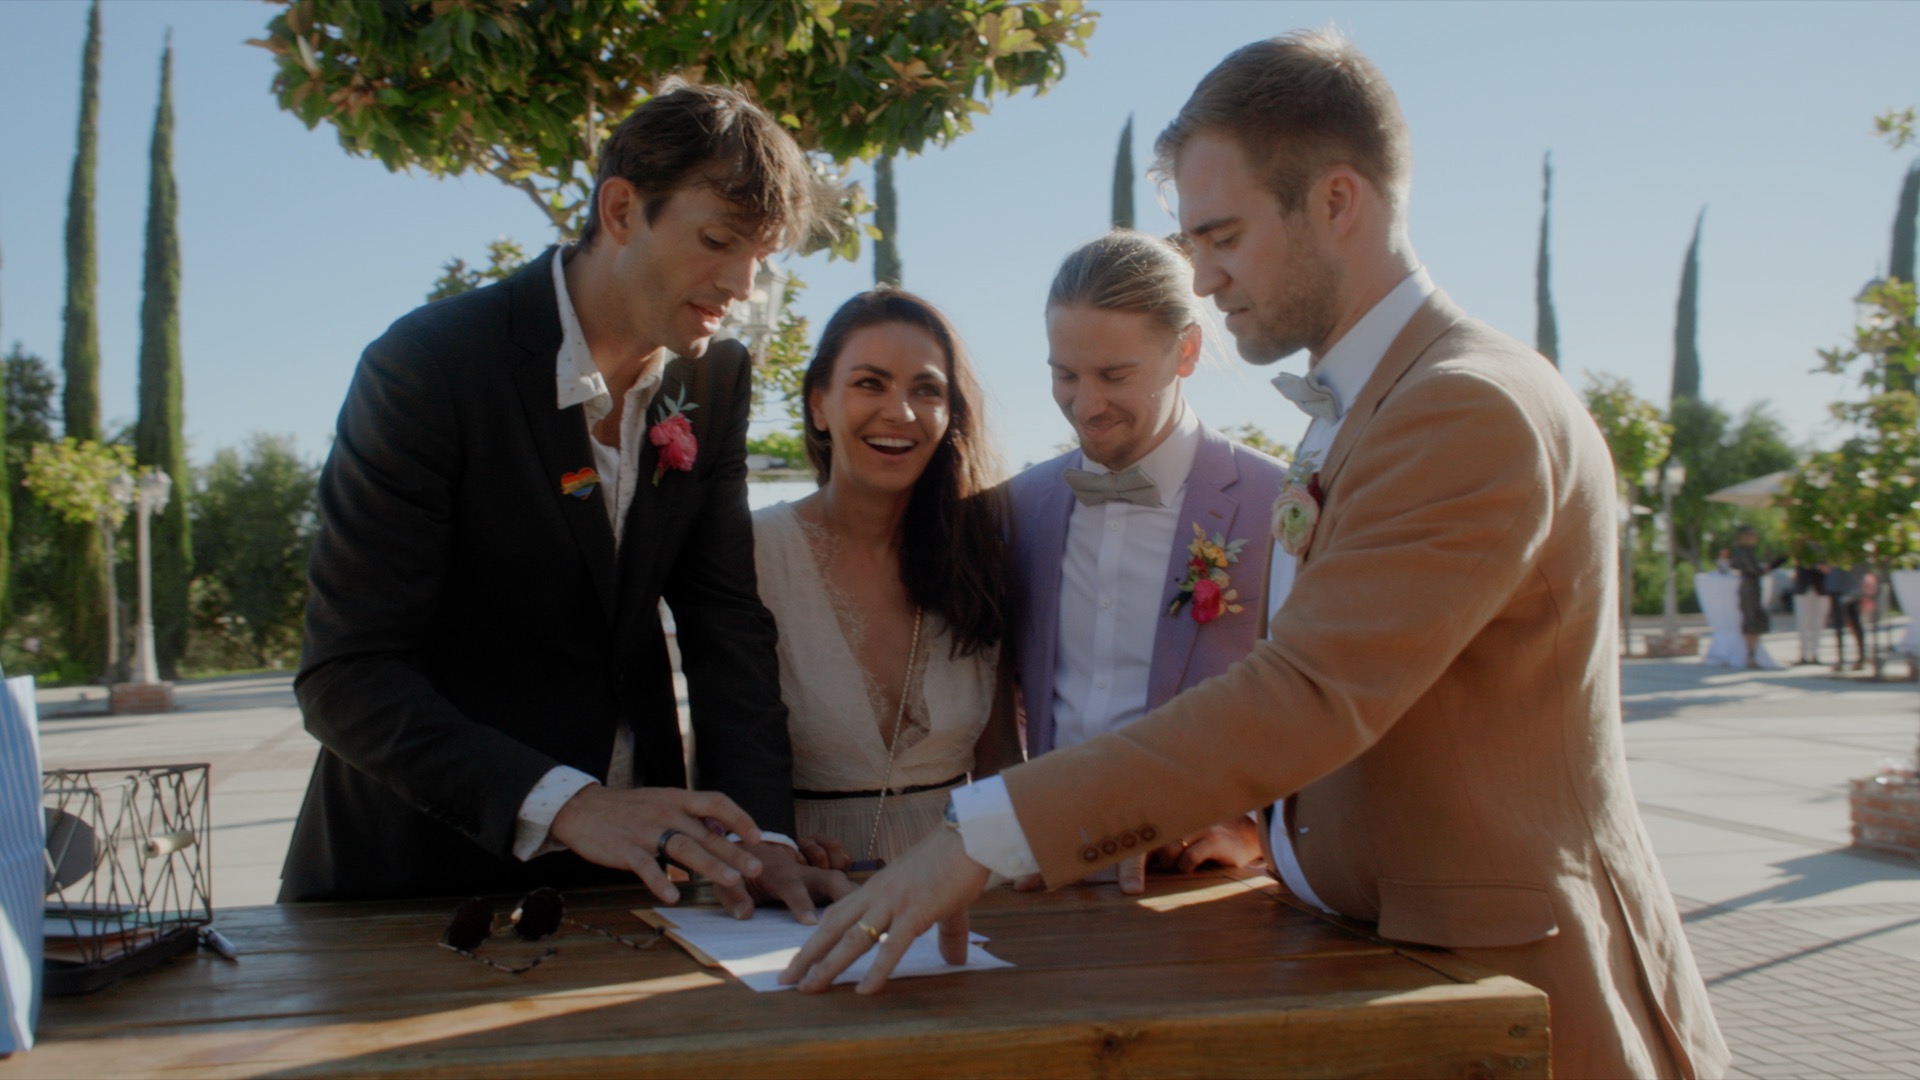 Ashton Kutcher and mila Kunis signing as witnesses to pk and mike's wedding in Temecula